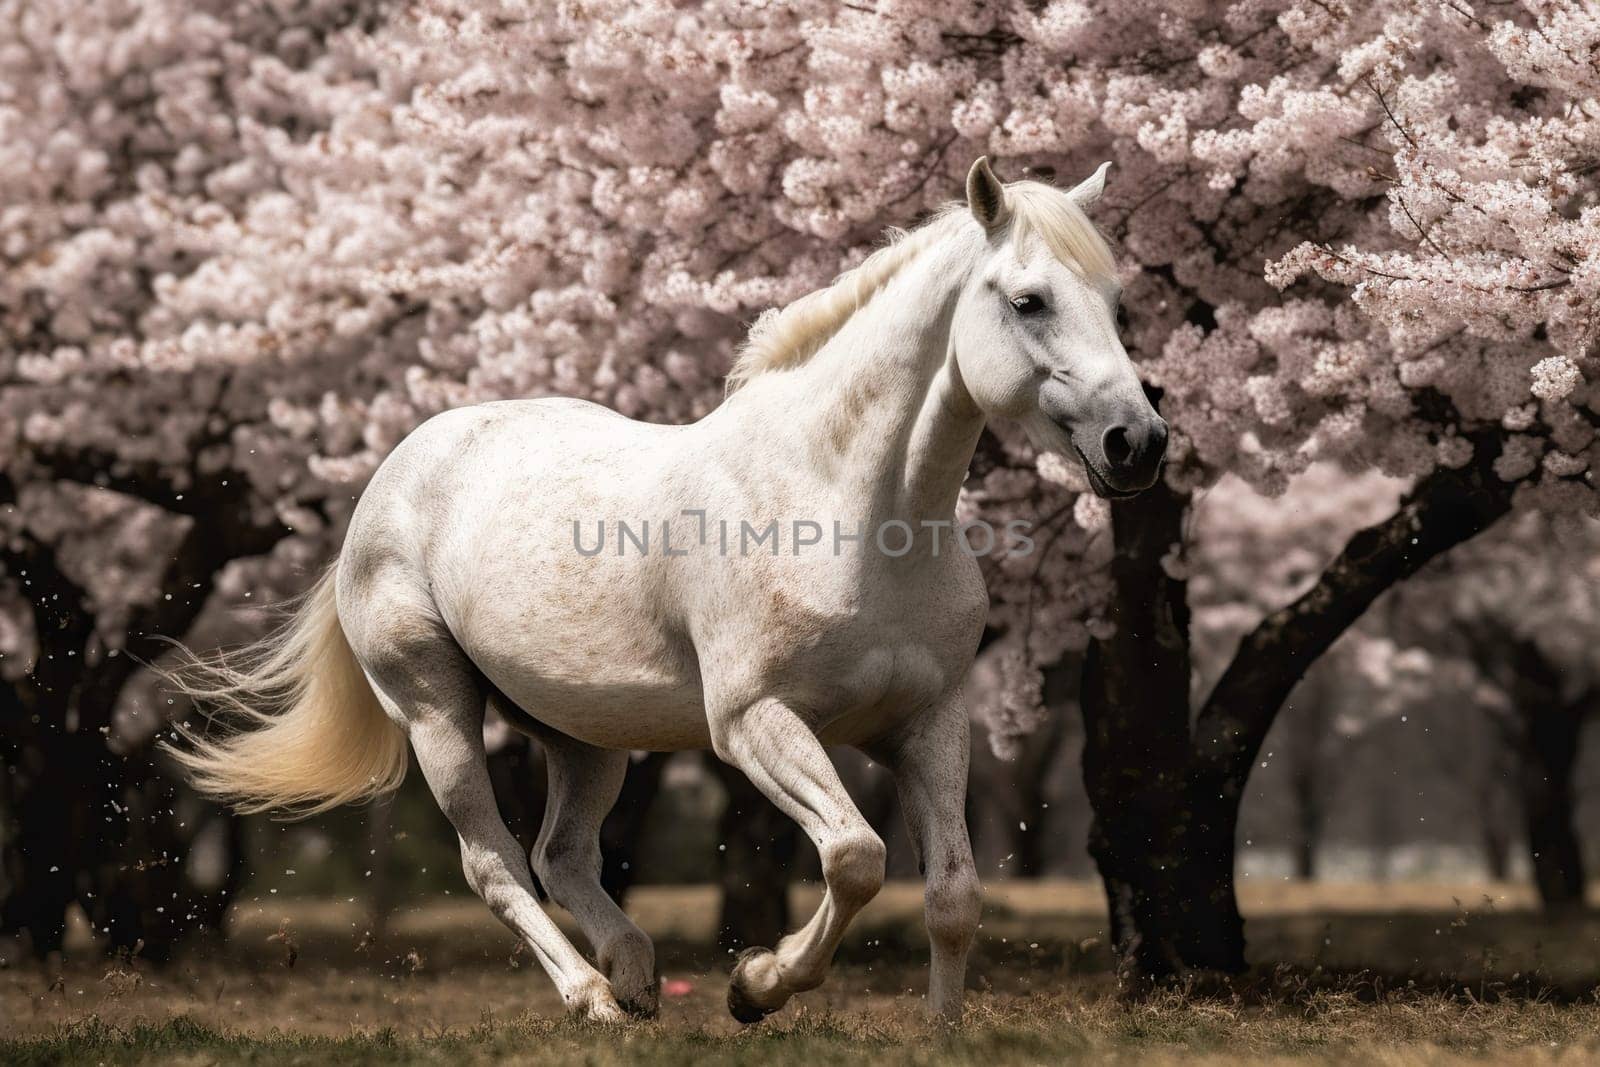 Horse Charges Against A Backdrop Of Blooming Cherry Blossoms